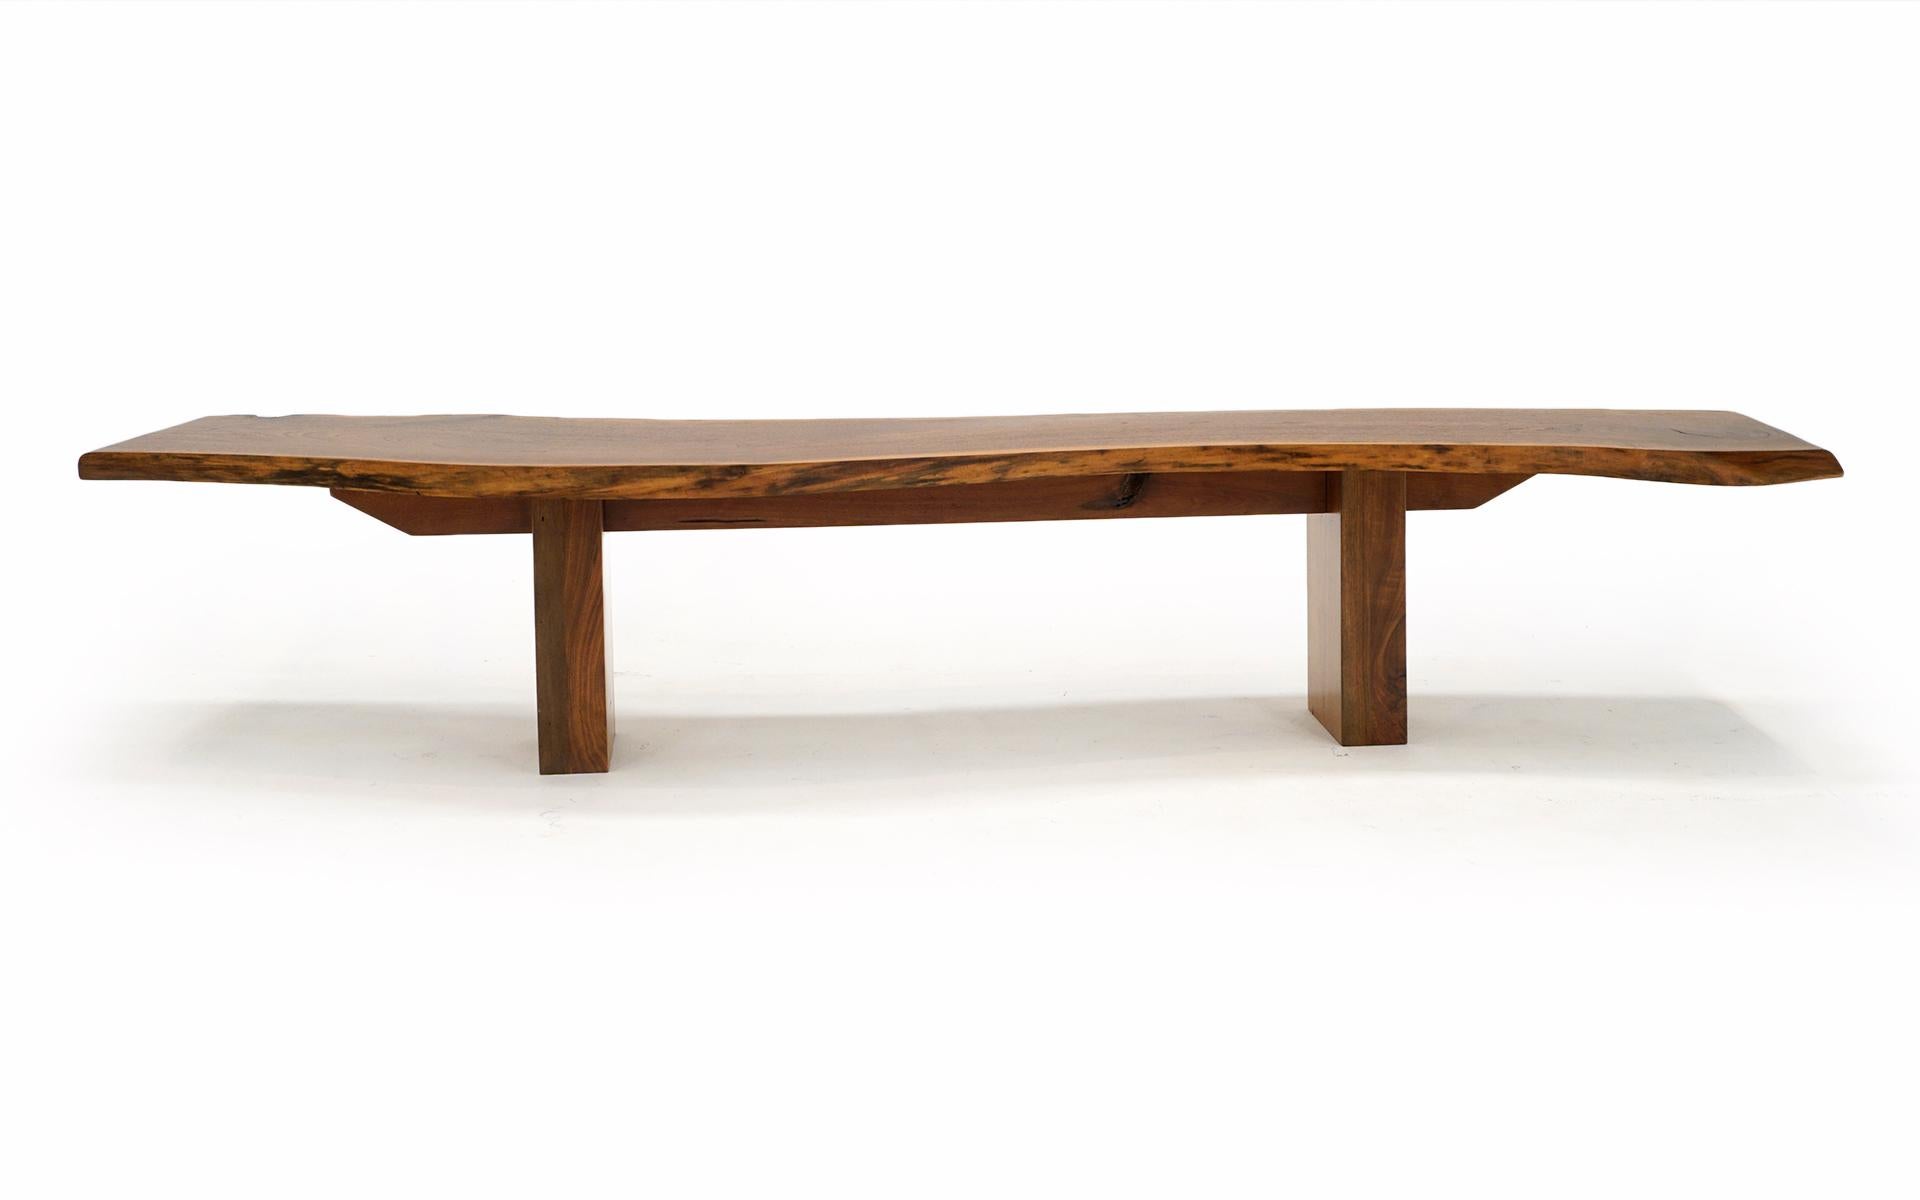 Contemporary Monumental Curved Bench / Coffee Table in Solid Live Edge Walnut, One of a Kind For Sale